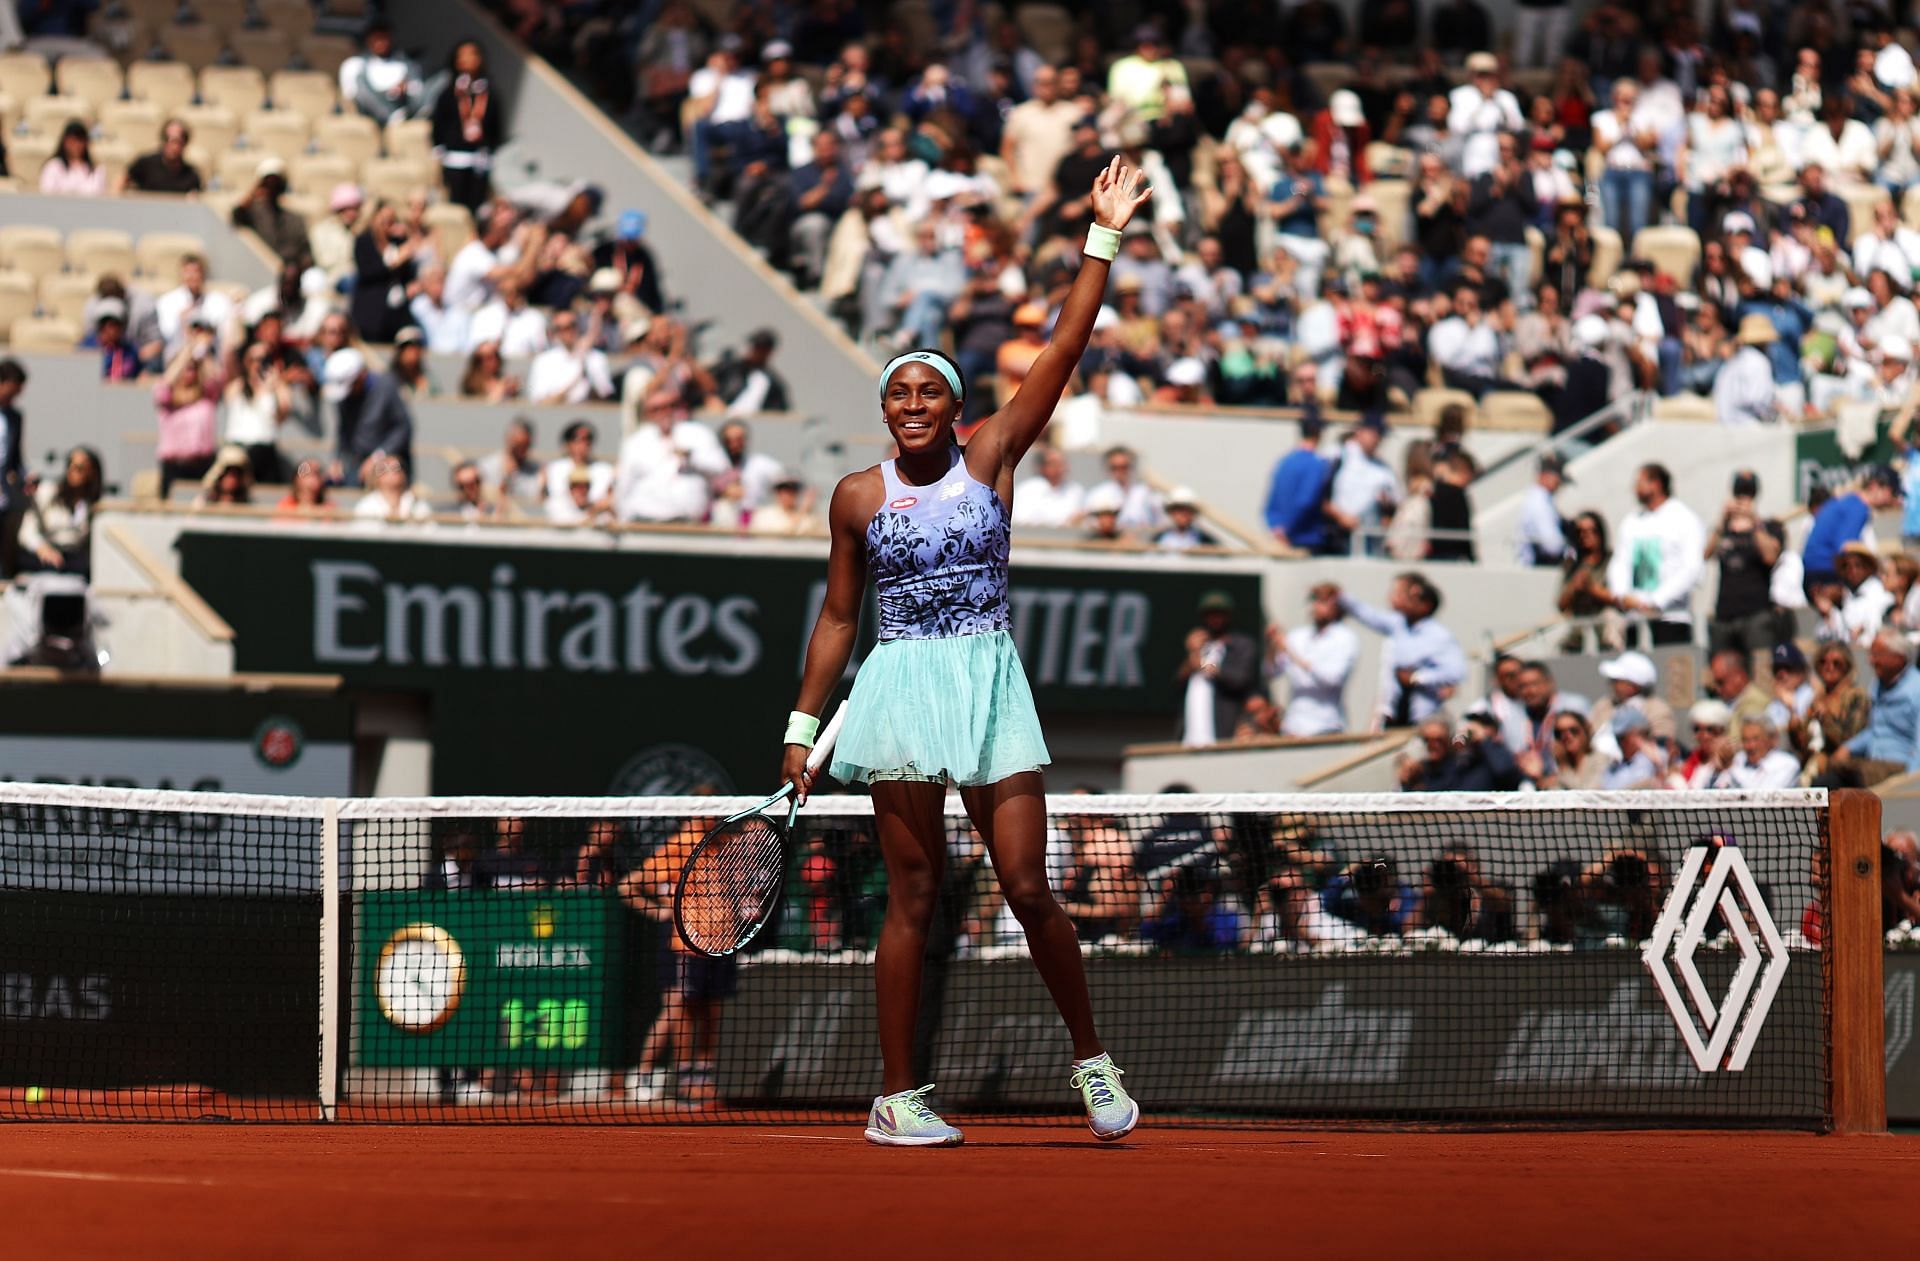 Coco Gauff will face Martina Trevisan in the semifinals of the 2022 French Open.